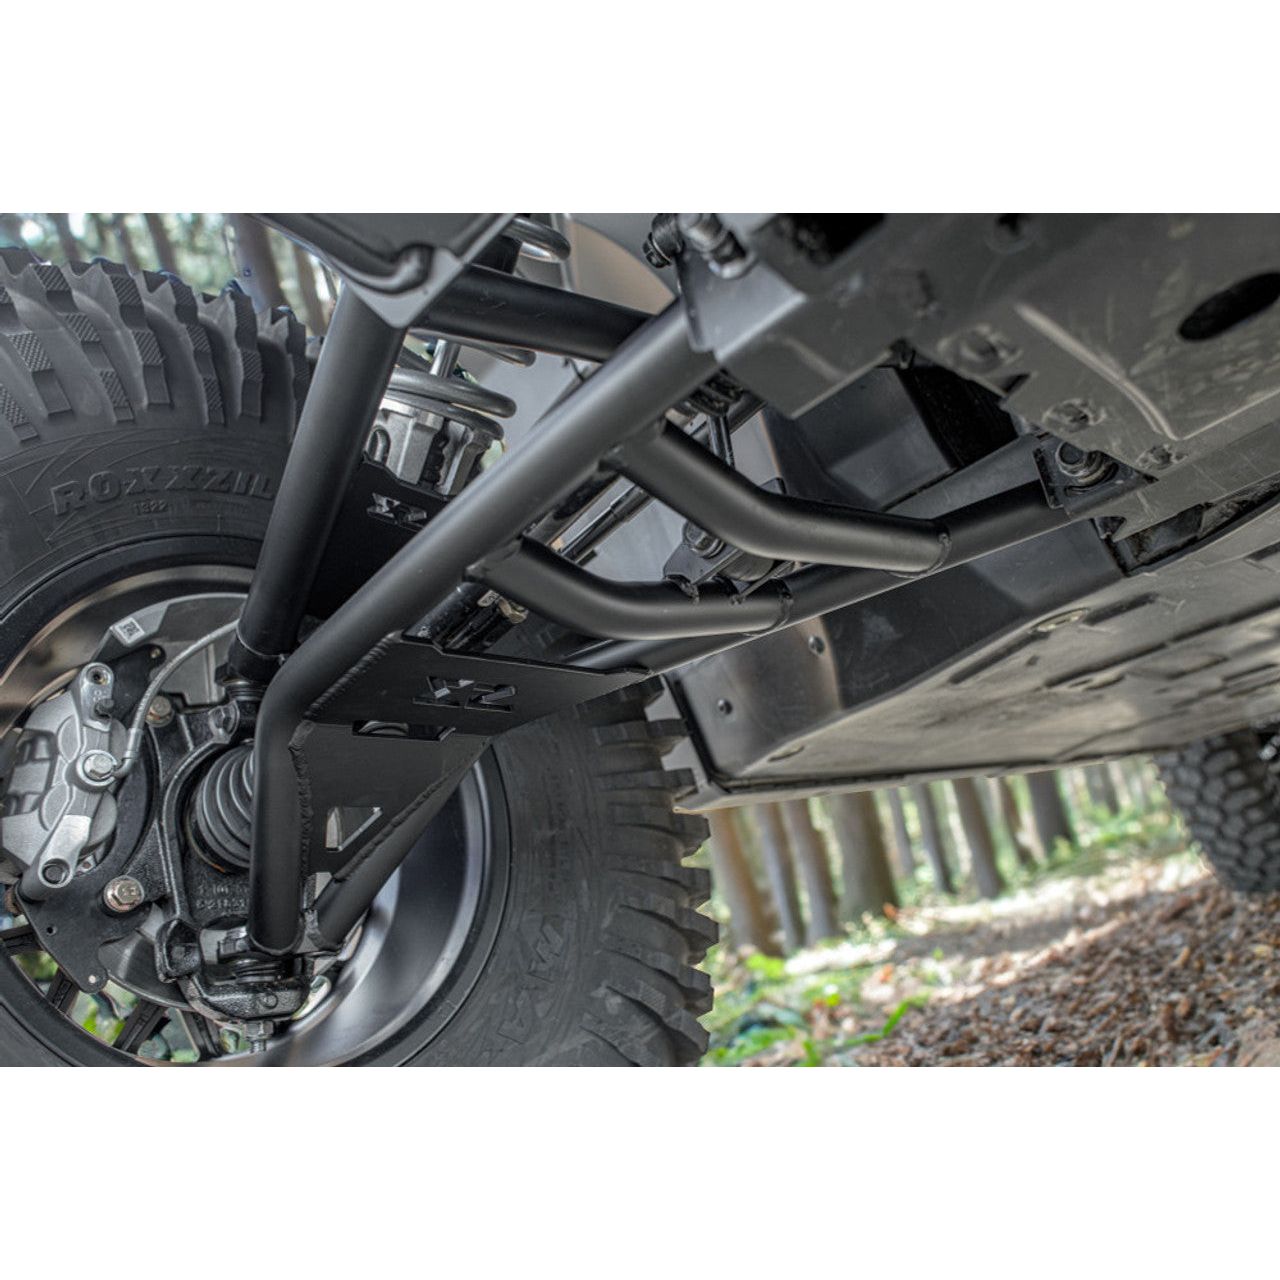 Polaris Xpedition +2" Forward Offset High Clearance A-Arm Kit | S3 Power Sports